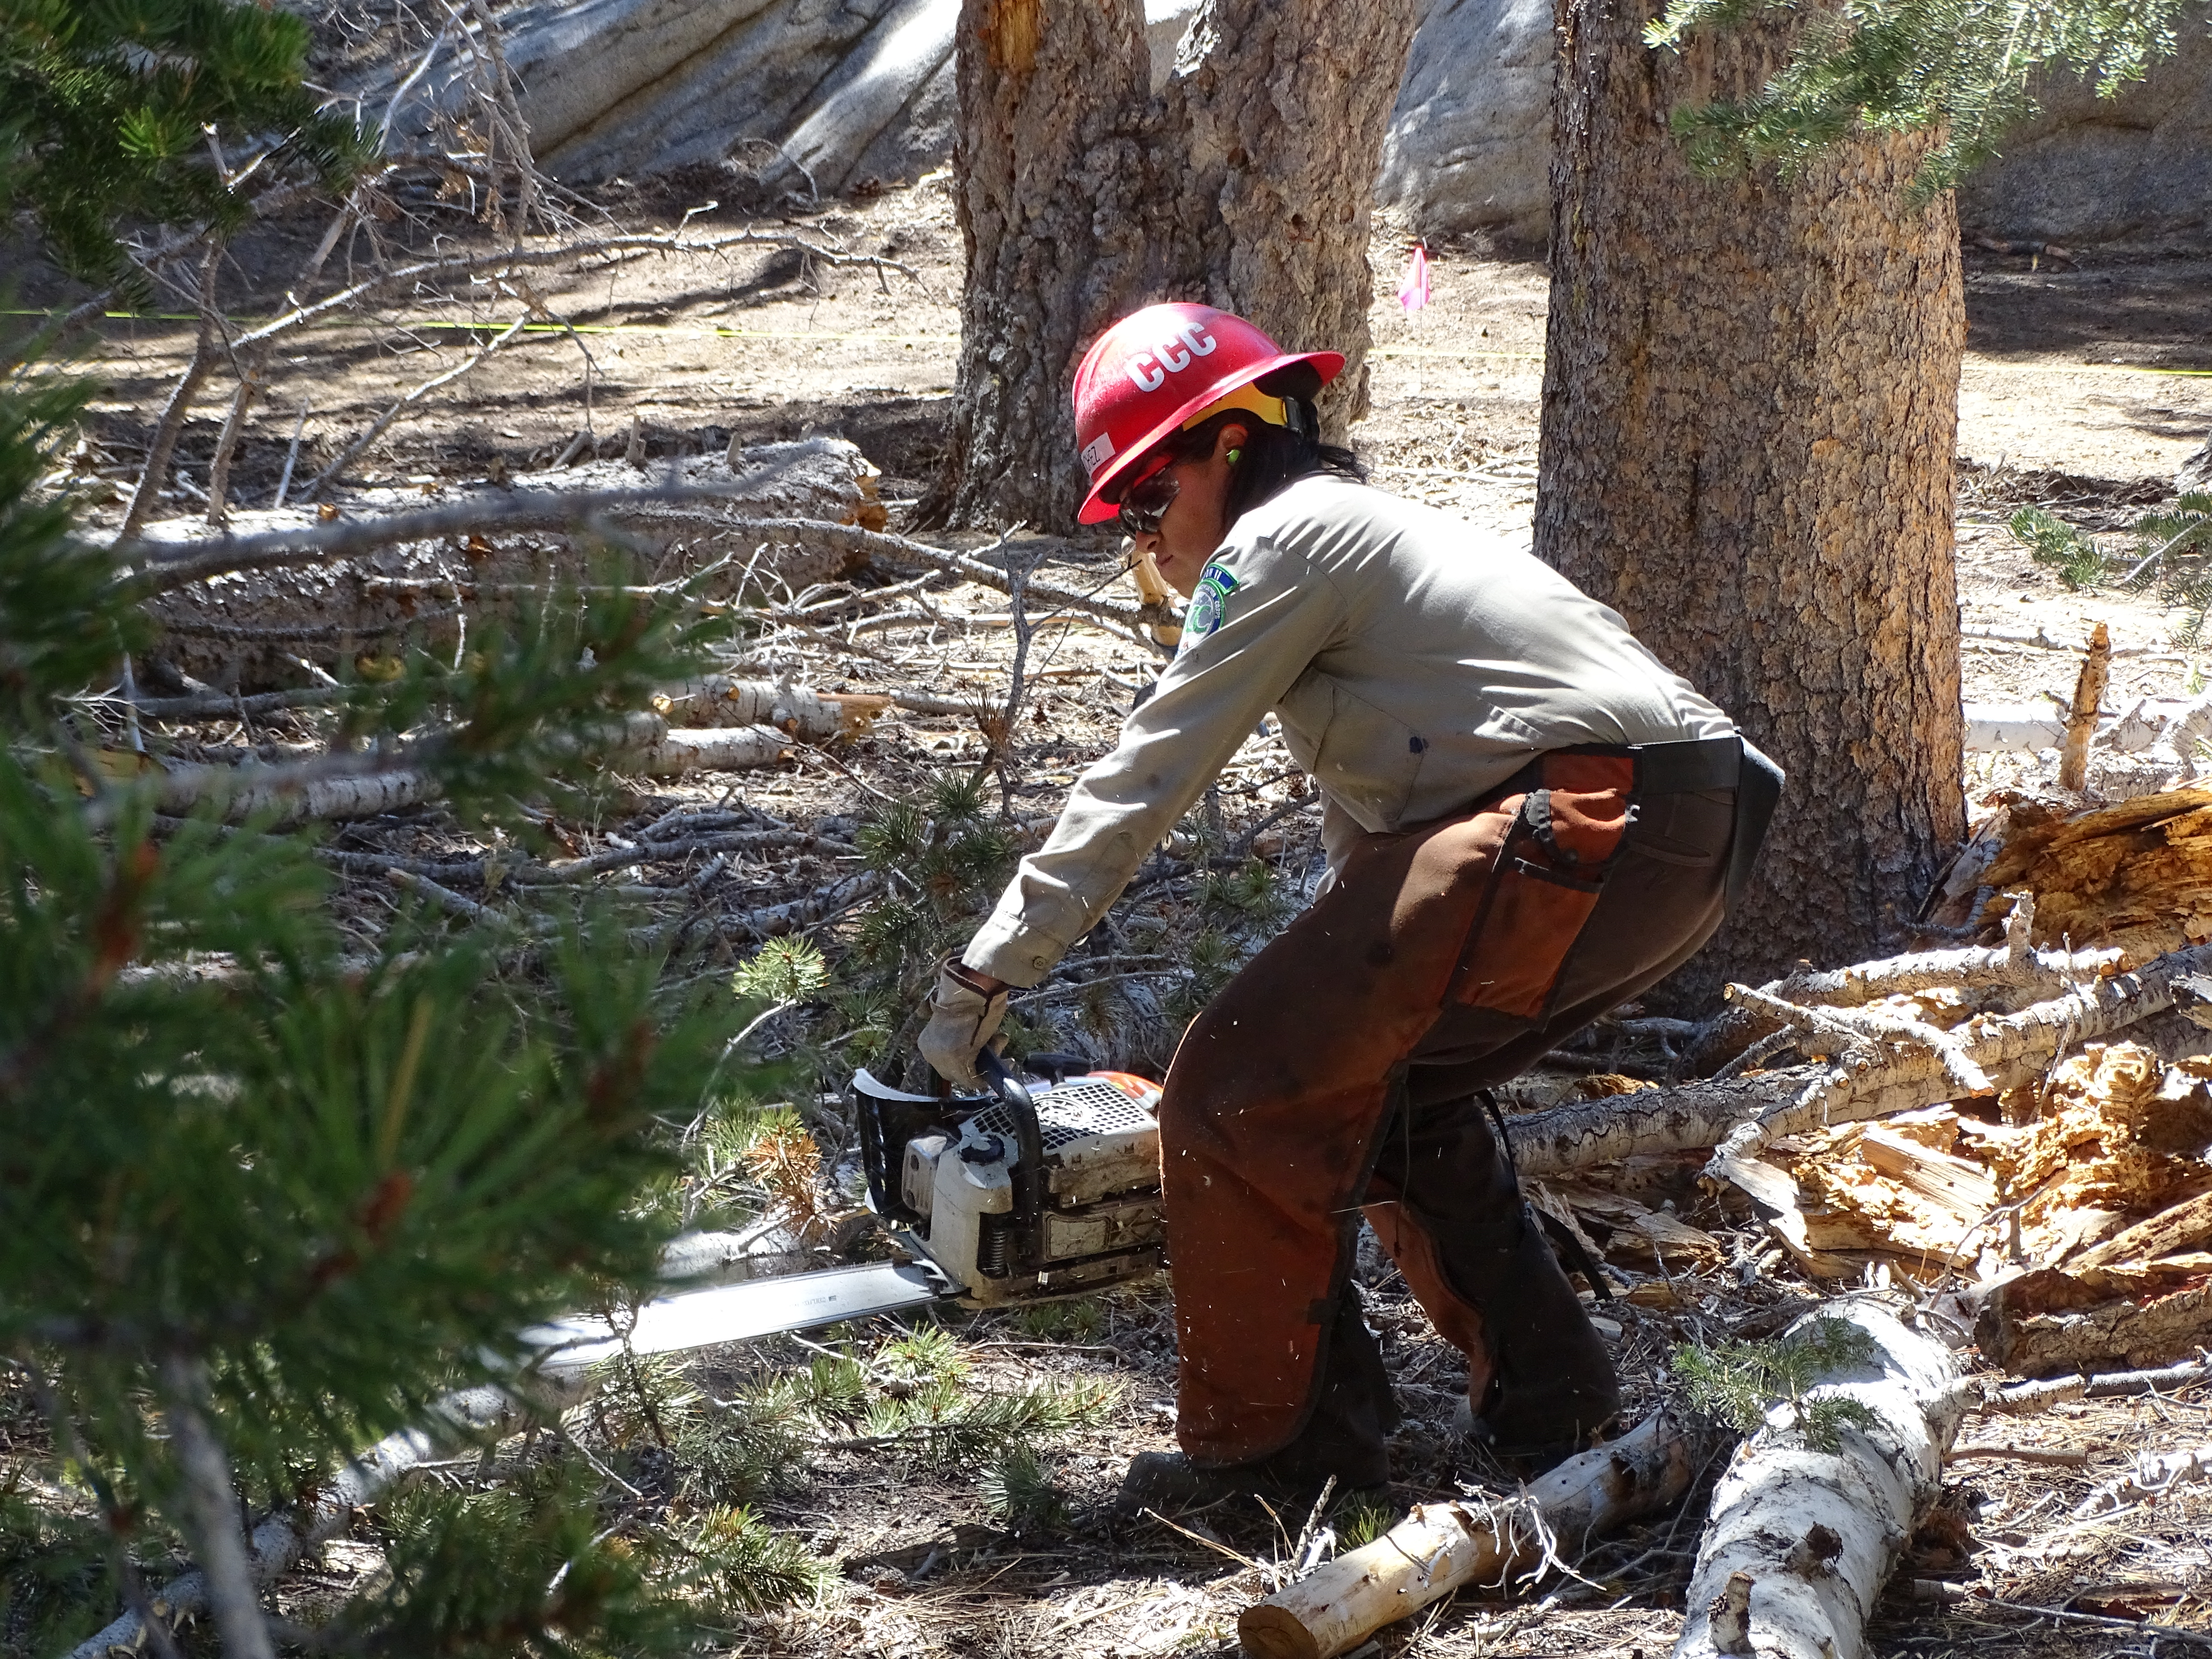 Corpsmember training to operate a chain saw properly and safely.